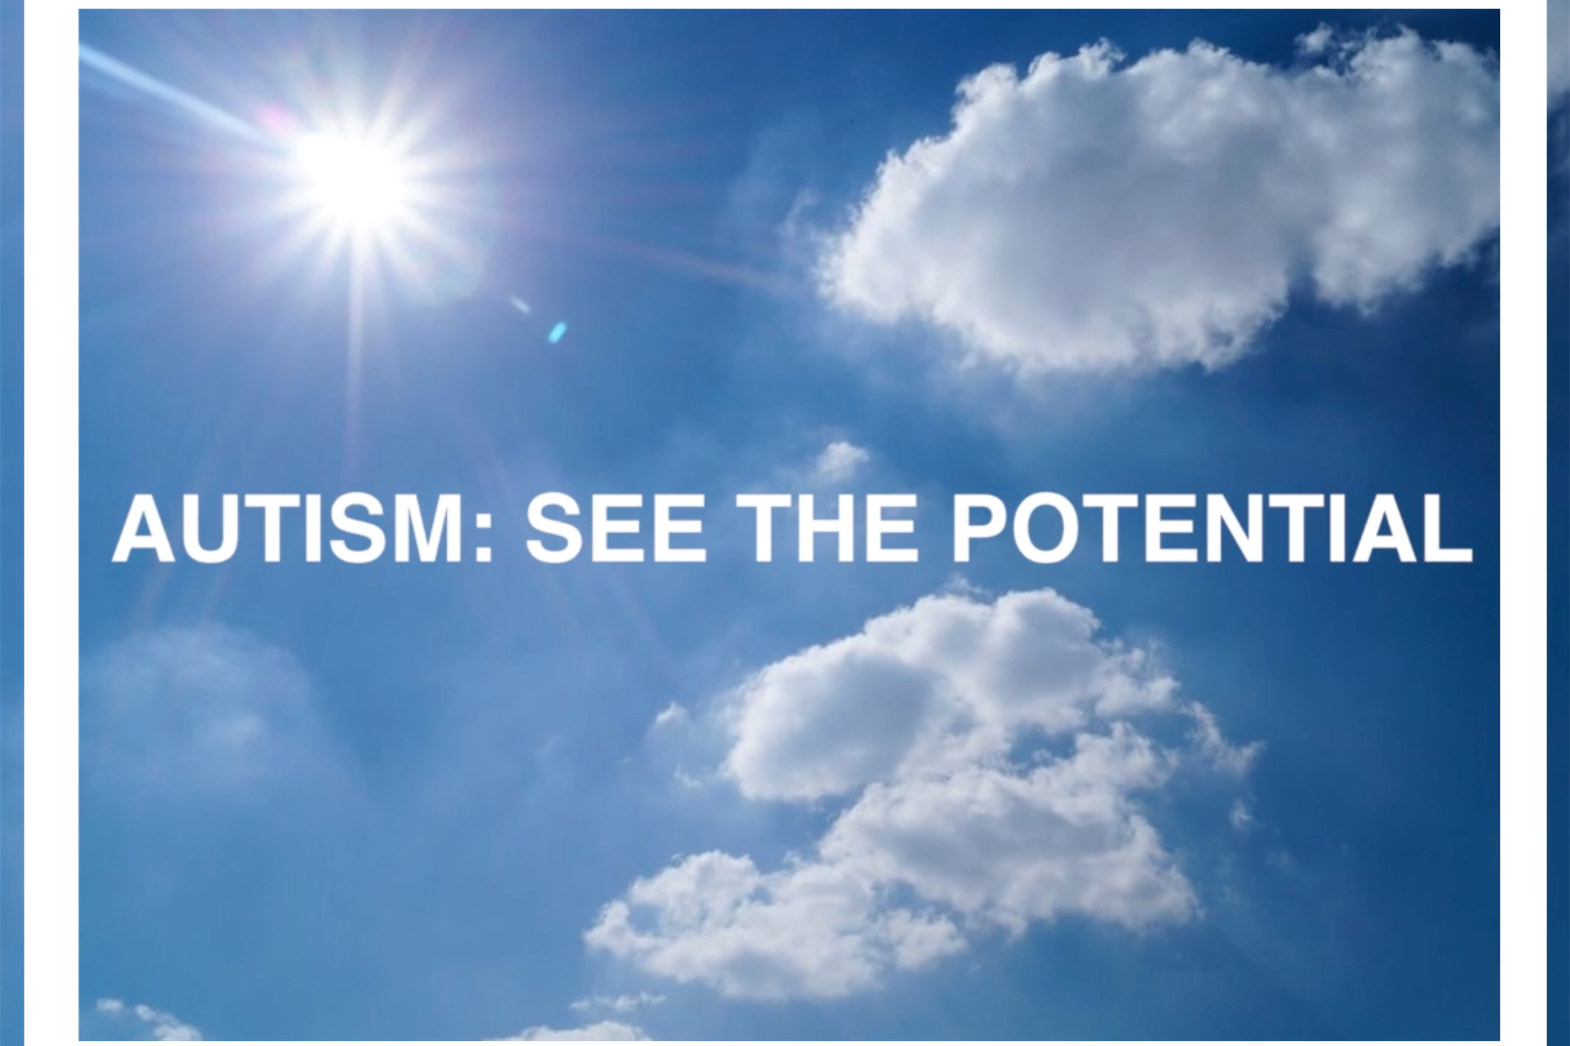 the words "Autism: See potential" written against a blue sky with some clouds in it.. 